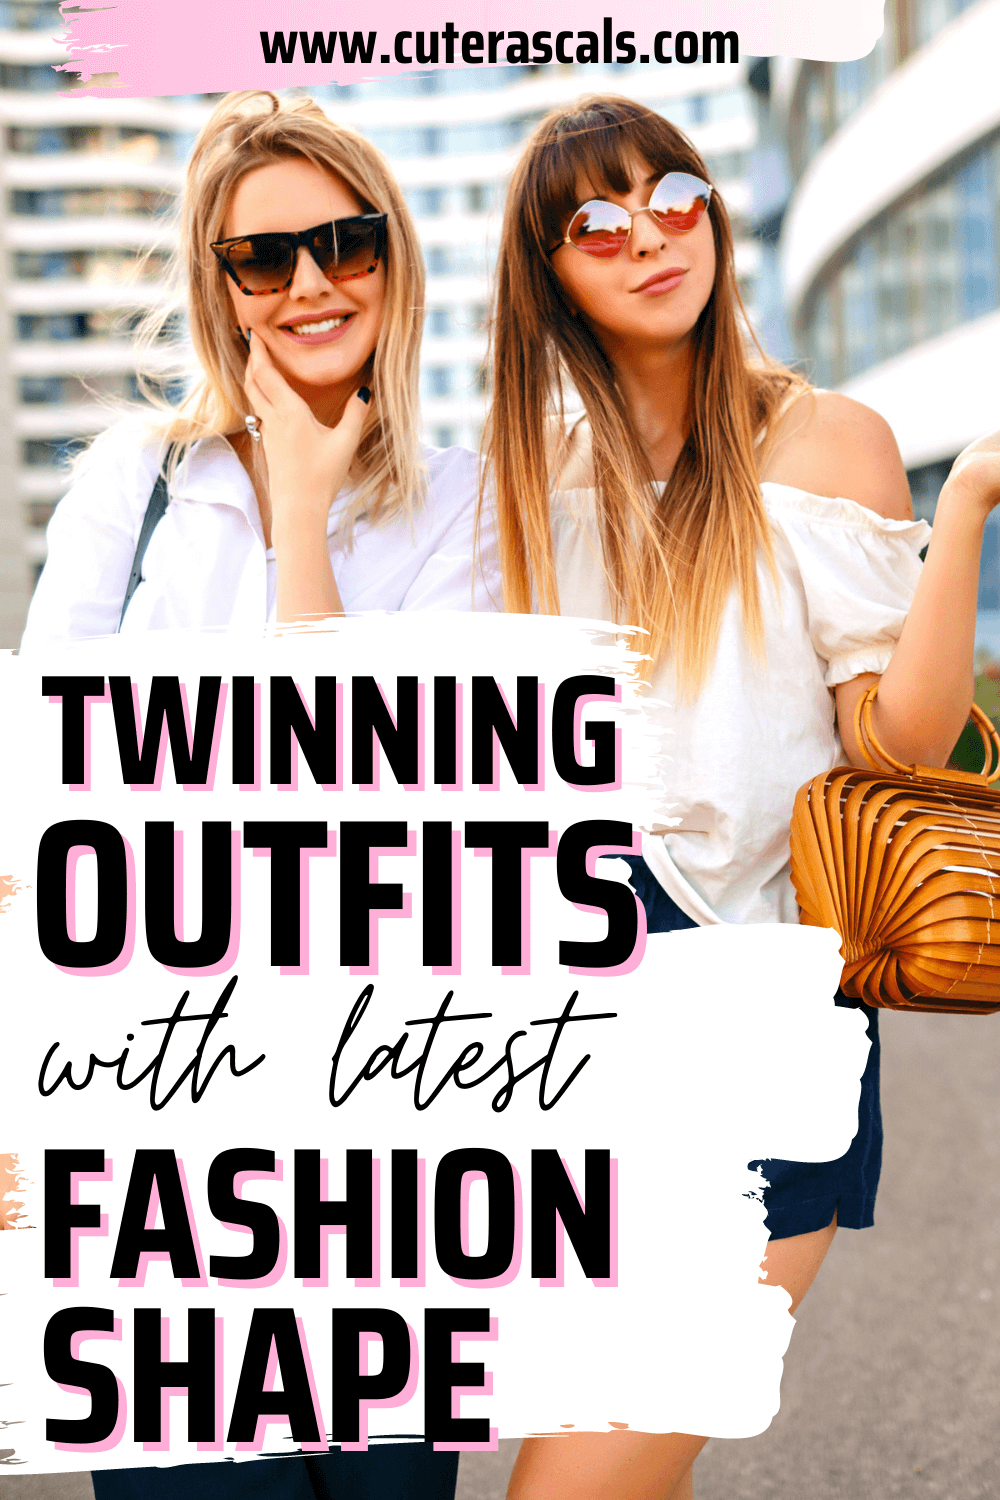 How to Aim and Develop Adorable & Stylish Trend in Twinning Fashion?